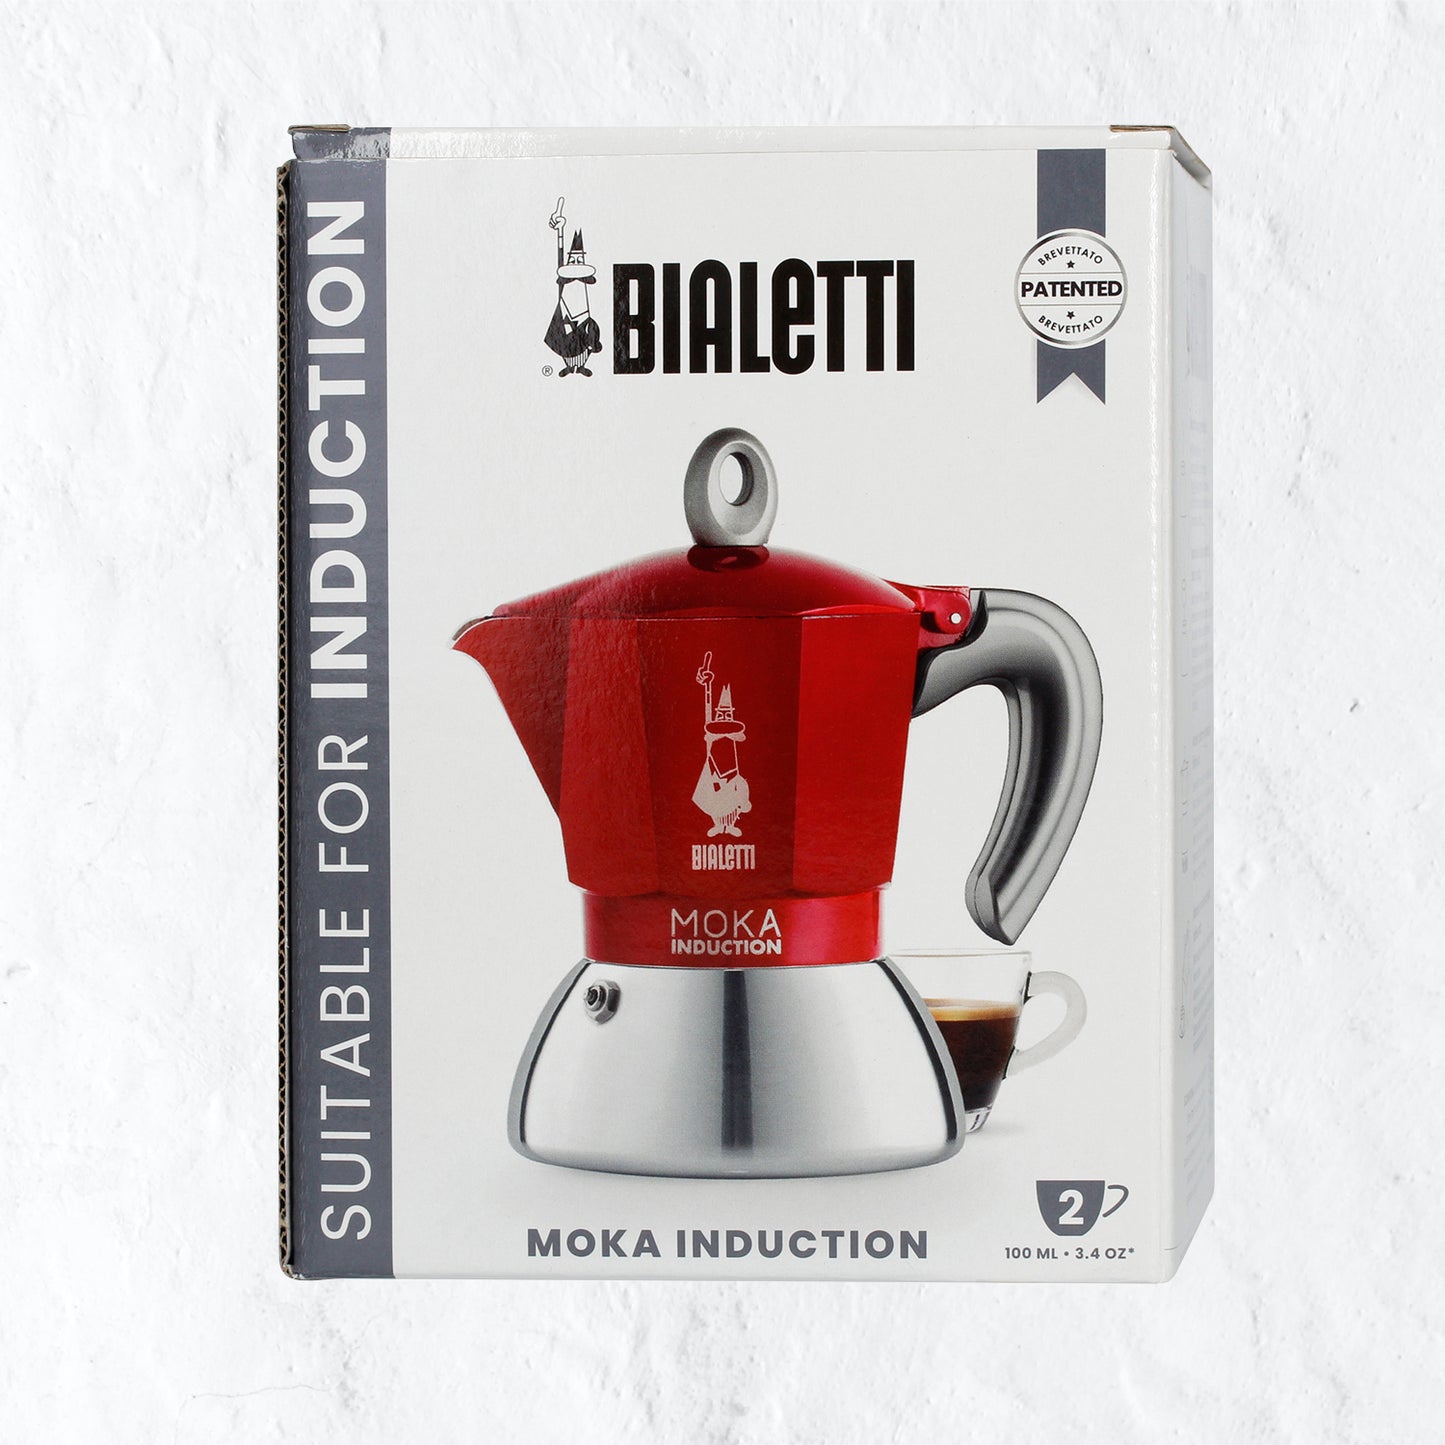 Bialetti Moka Induction - 2 person - red